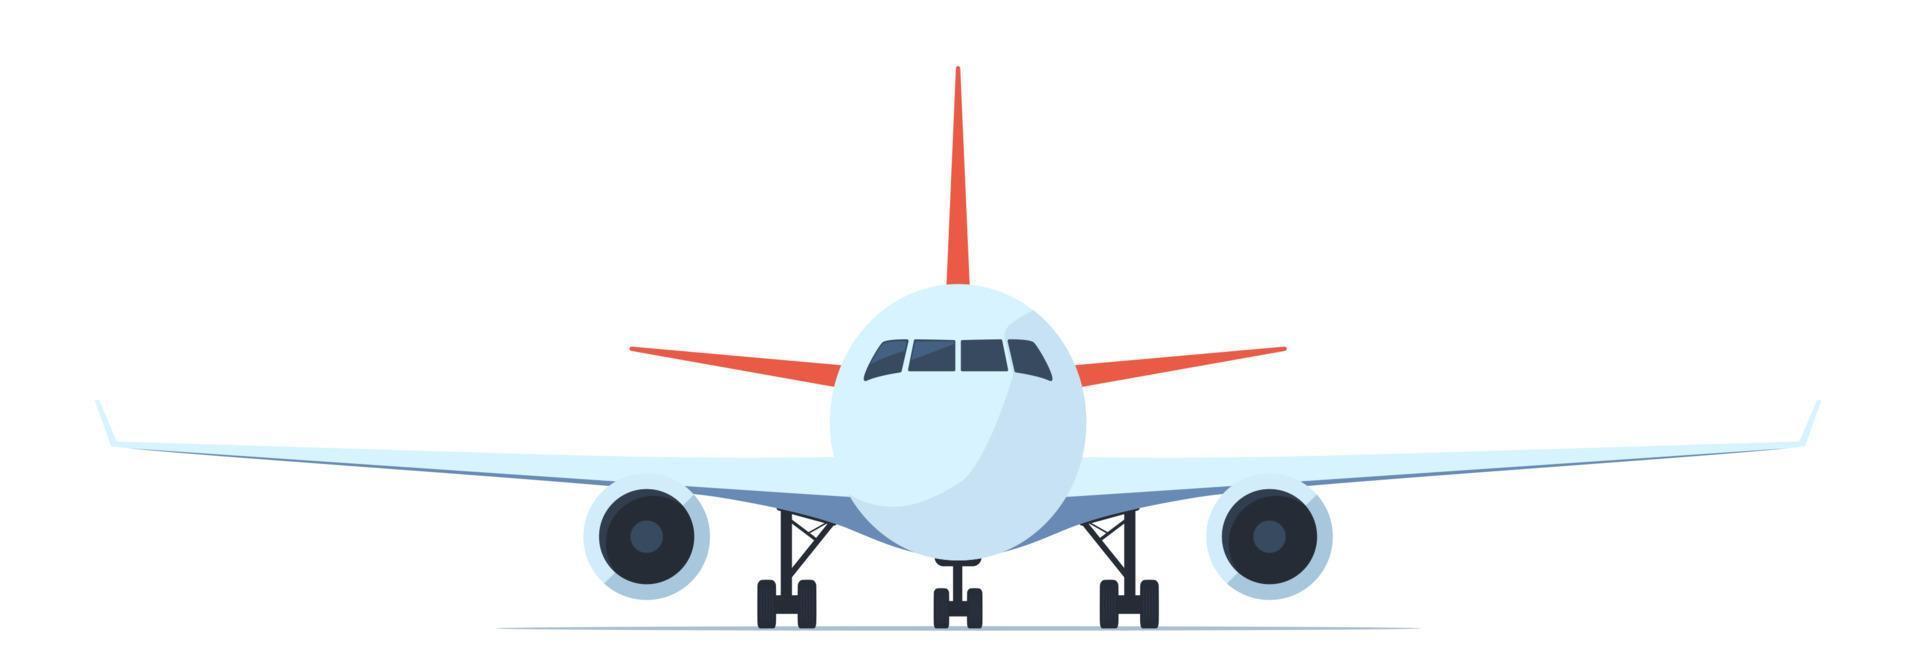 Passenger airplane, front view. Flat vector illustration of aeroplane with portholes, wings and engines.